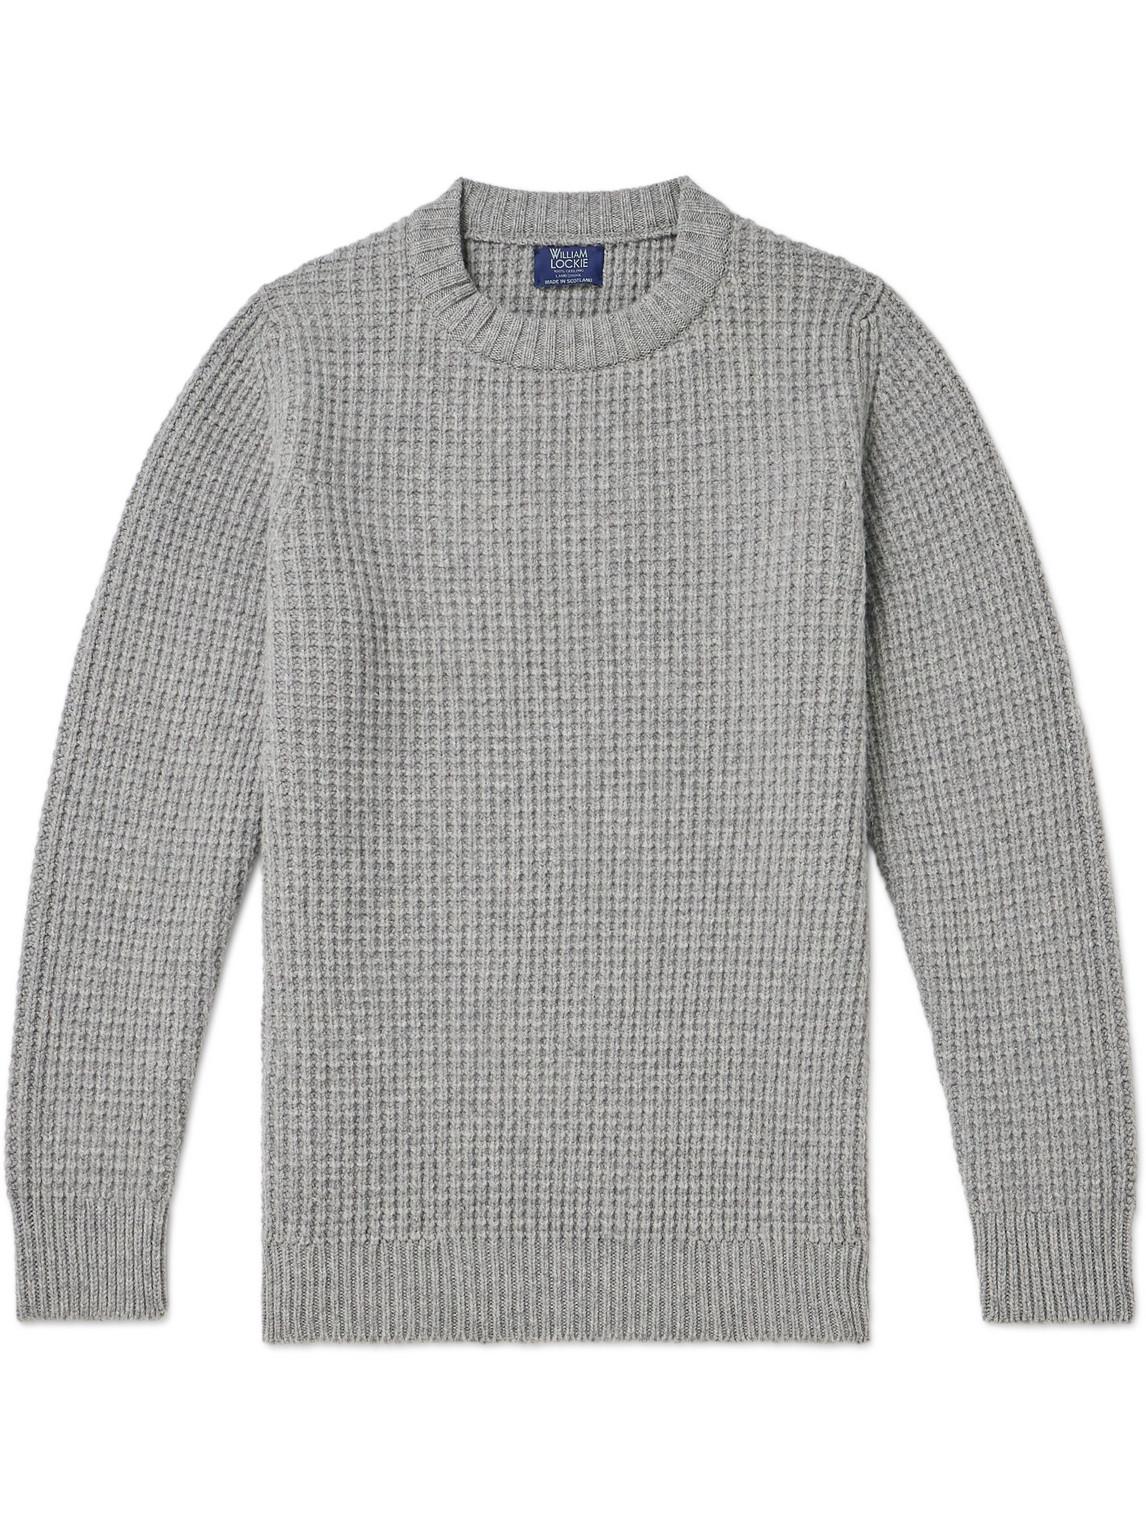 William Lockie Cliveden Waffle-knit Wool Sweater In Gray